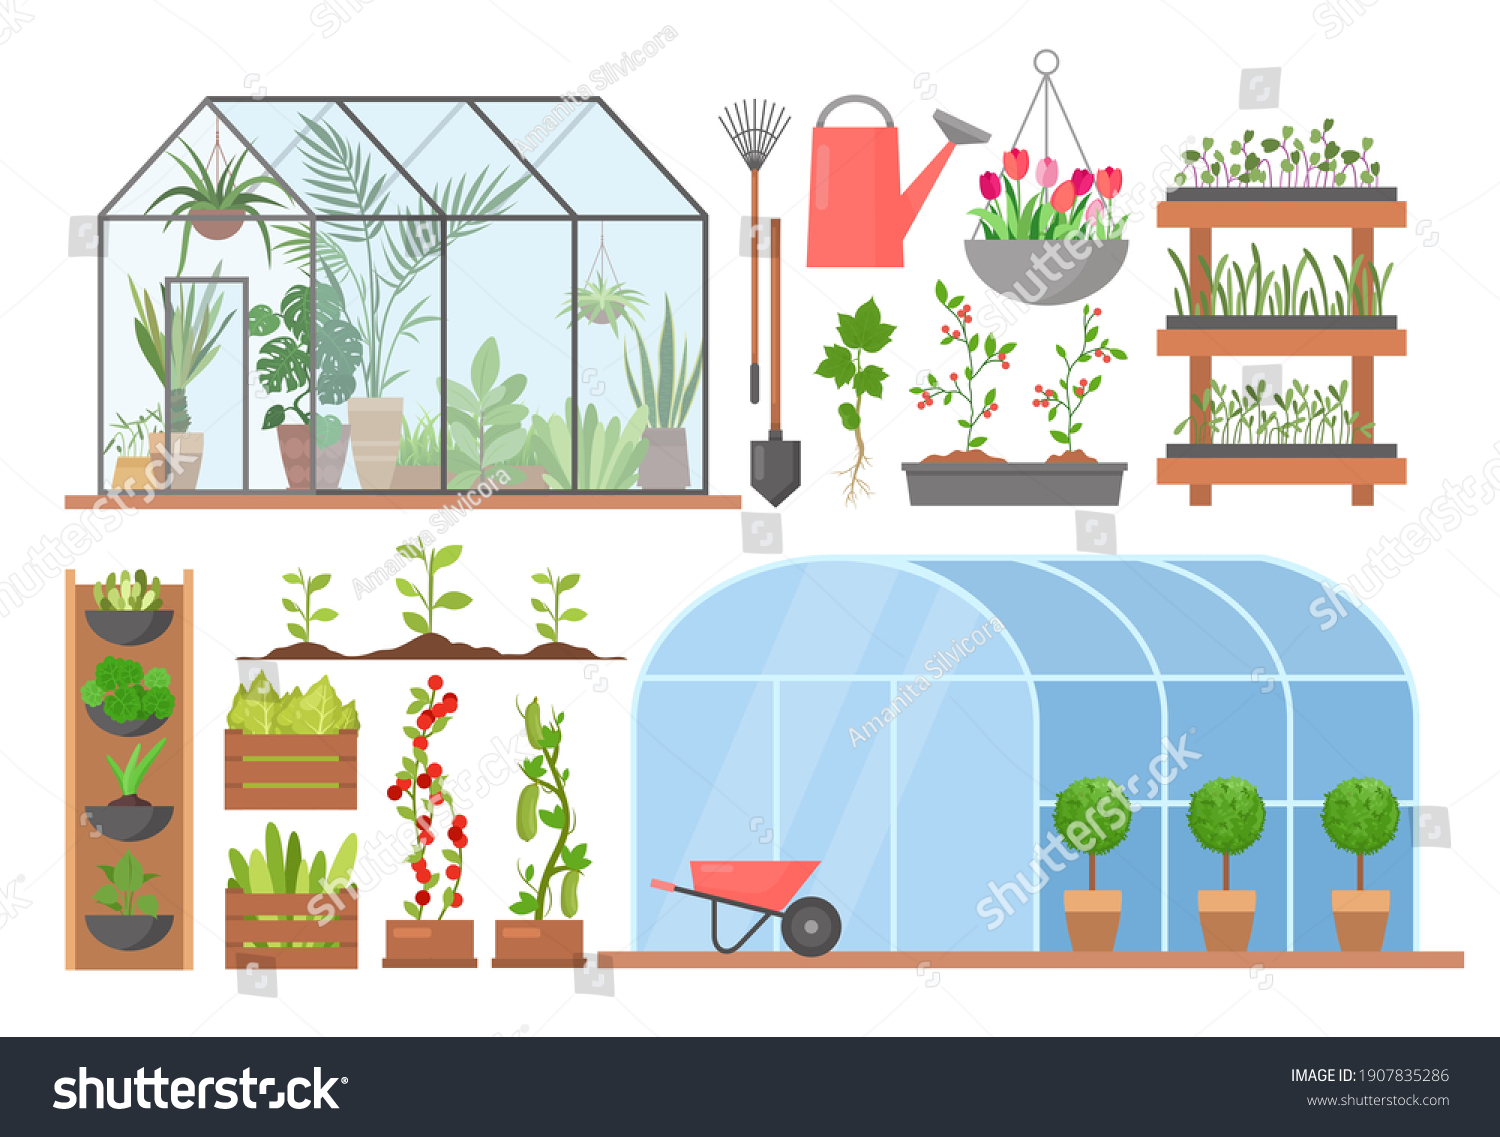 SVG of Greenhouse flower plant vegetable cultivation vector illustration set. Cartoon glasshouses for planting and growing natural organic agricultural products, garden equipment and tools isolated on white svg